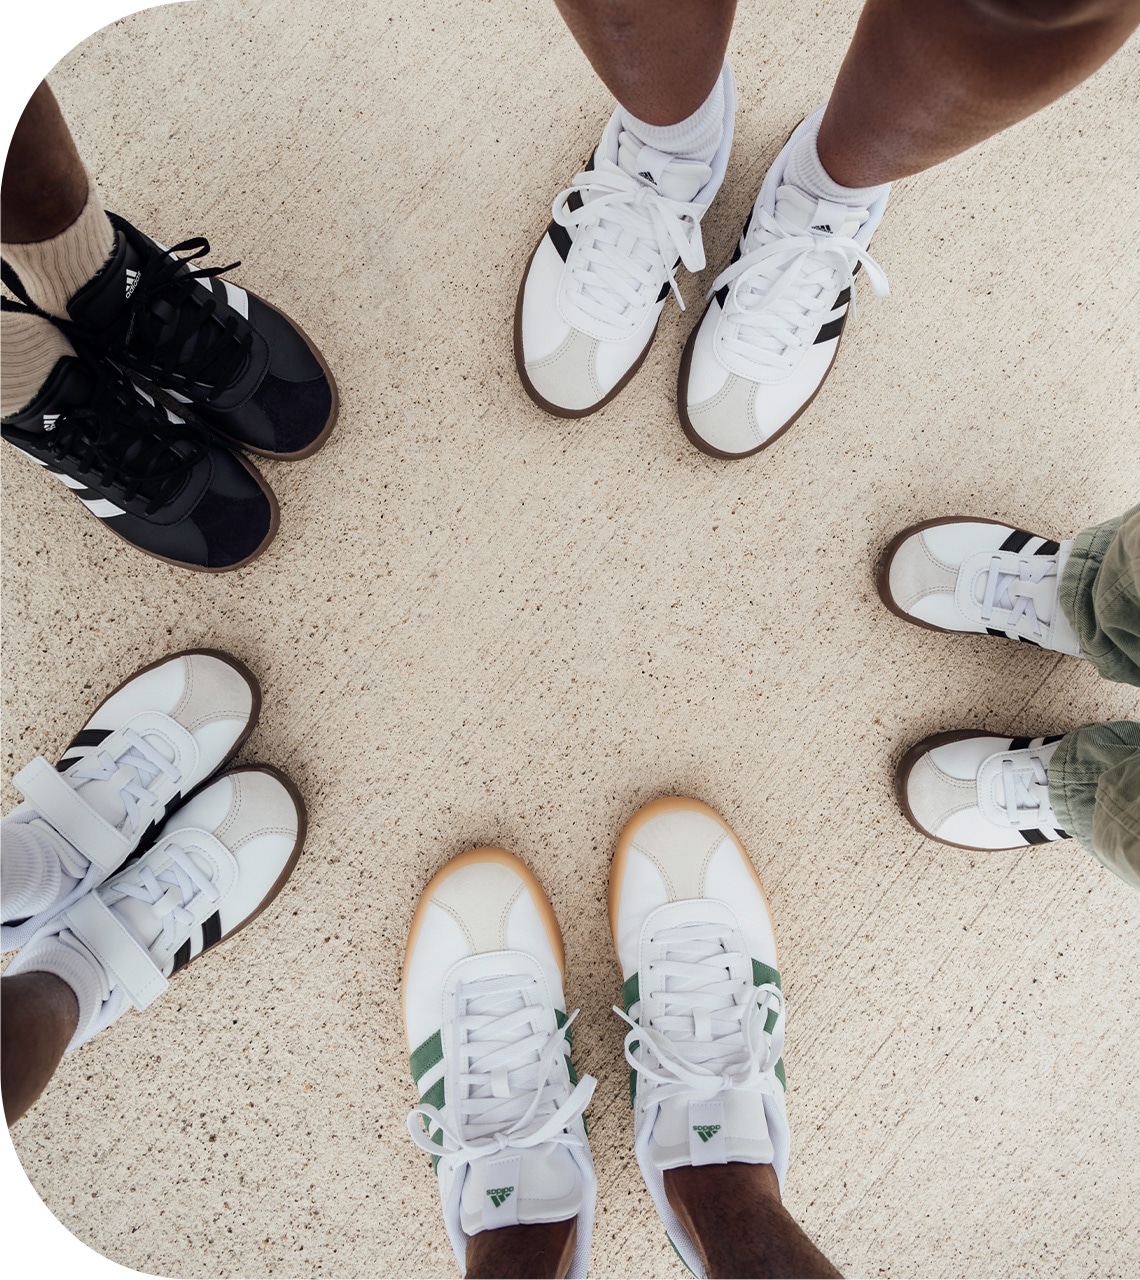 court sneakers for all ages and genders